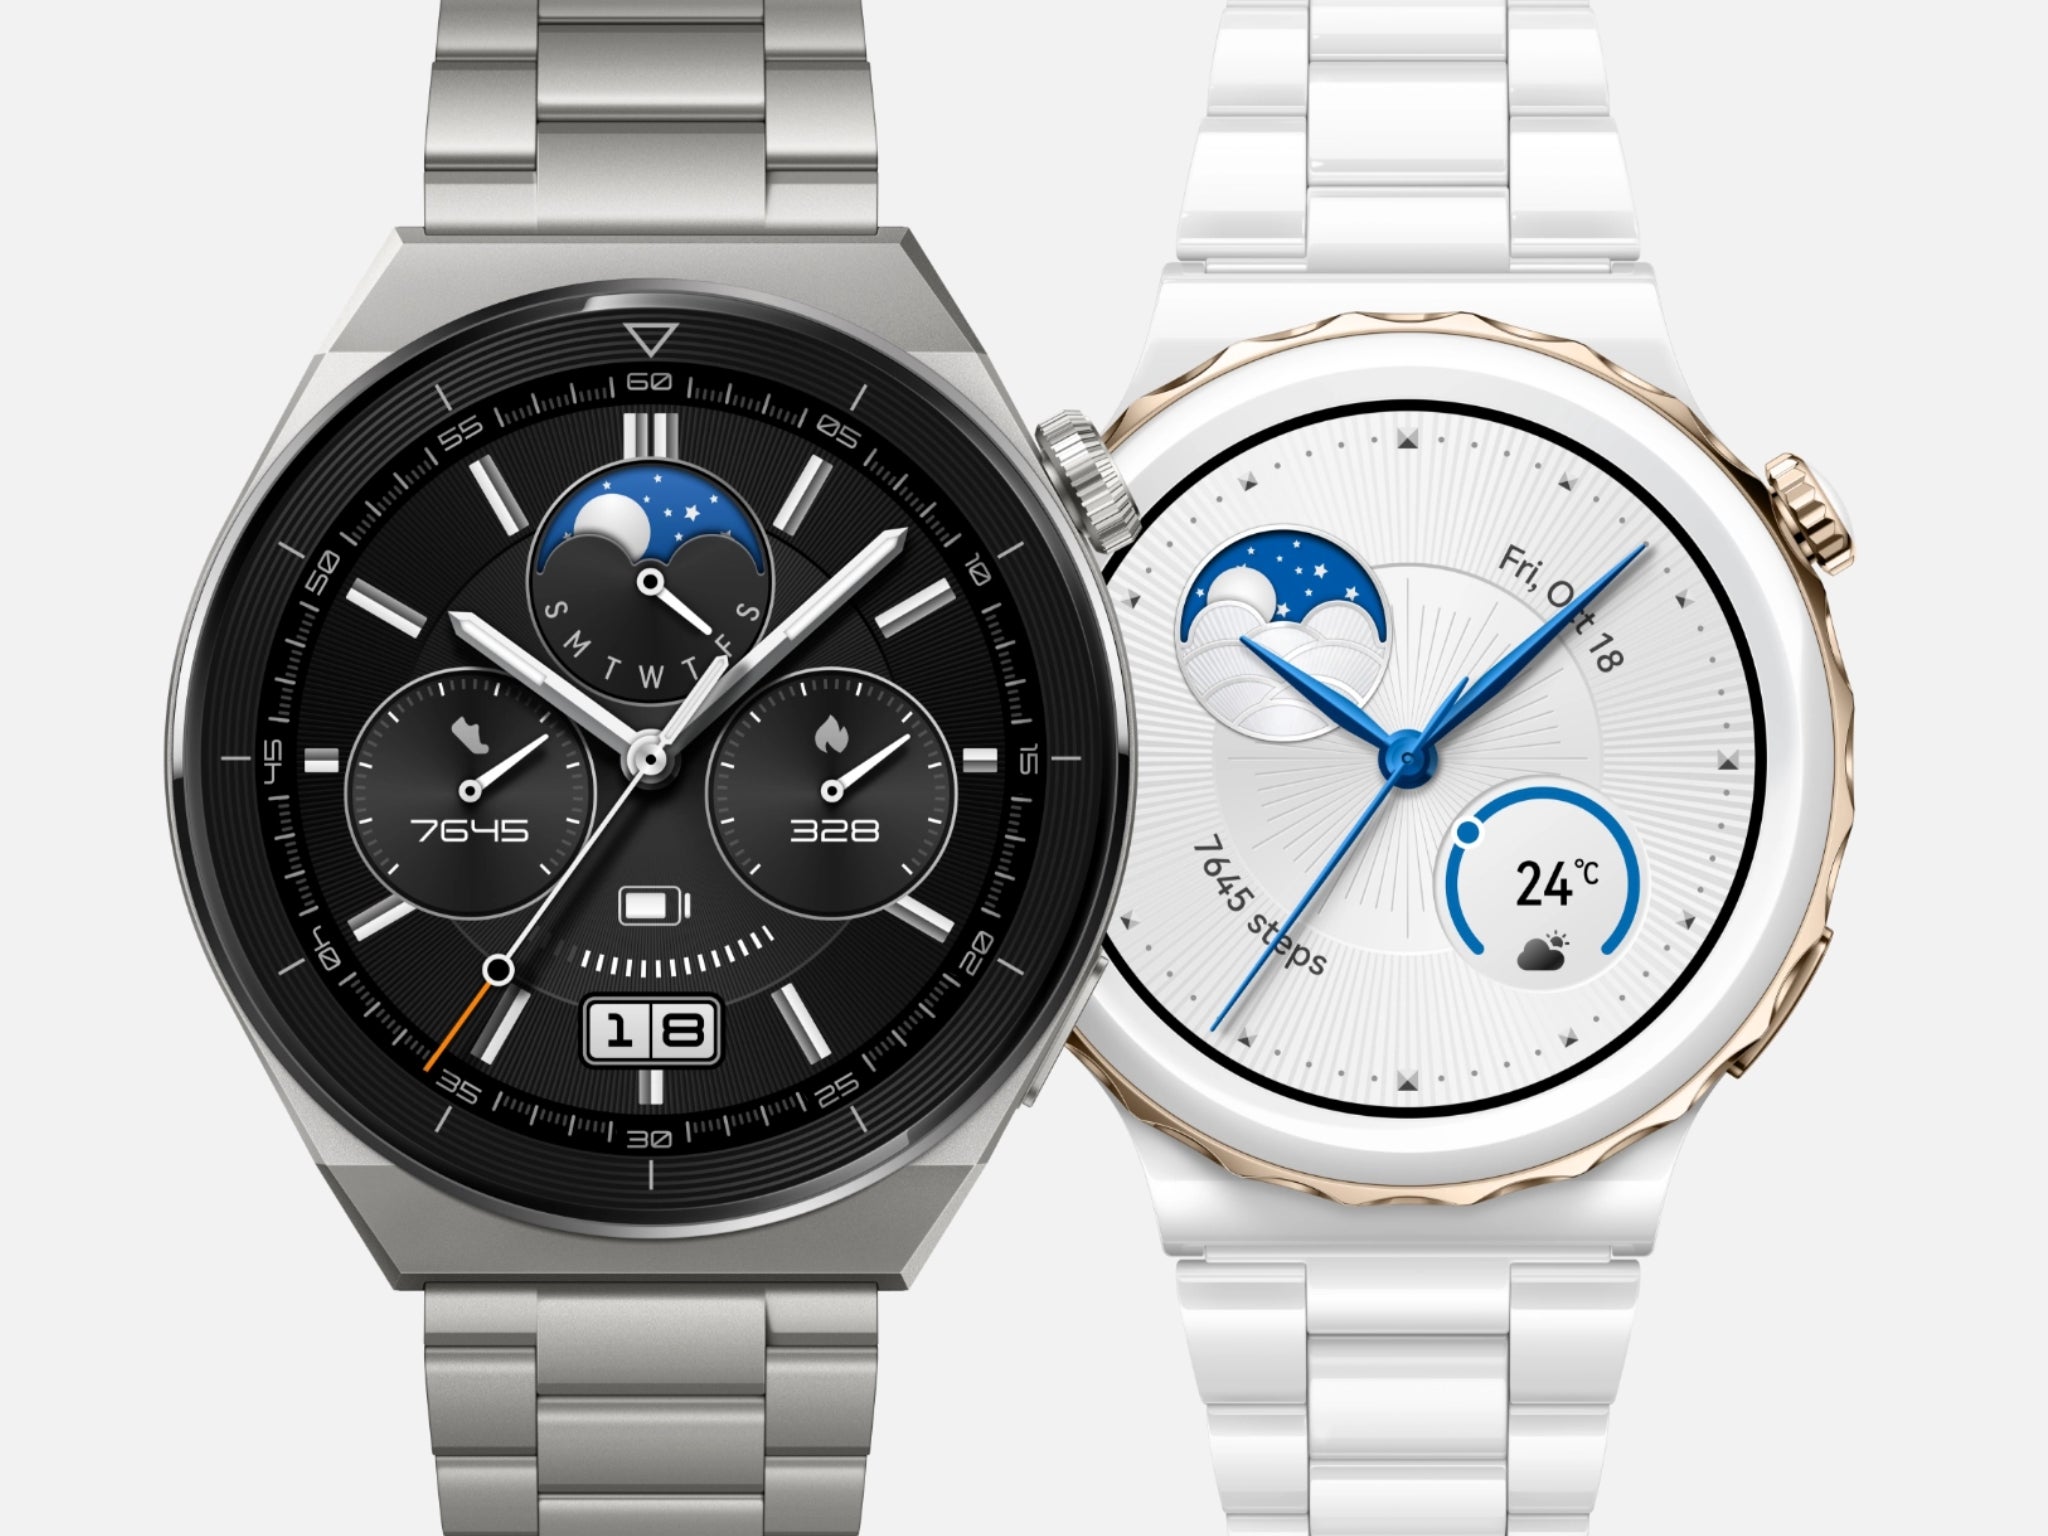 Huawei watch GT 3 pro: How to pre-order the new fitness wearable